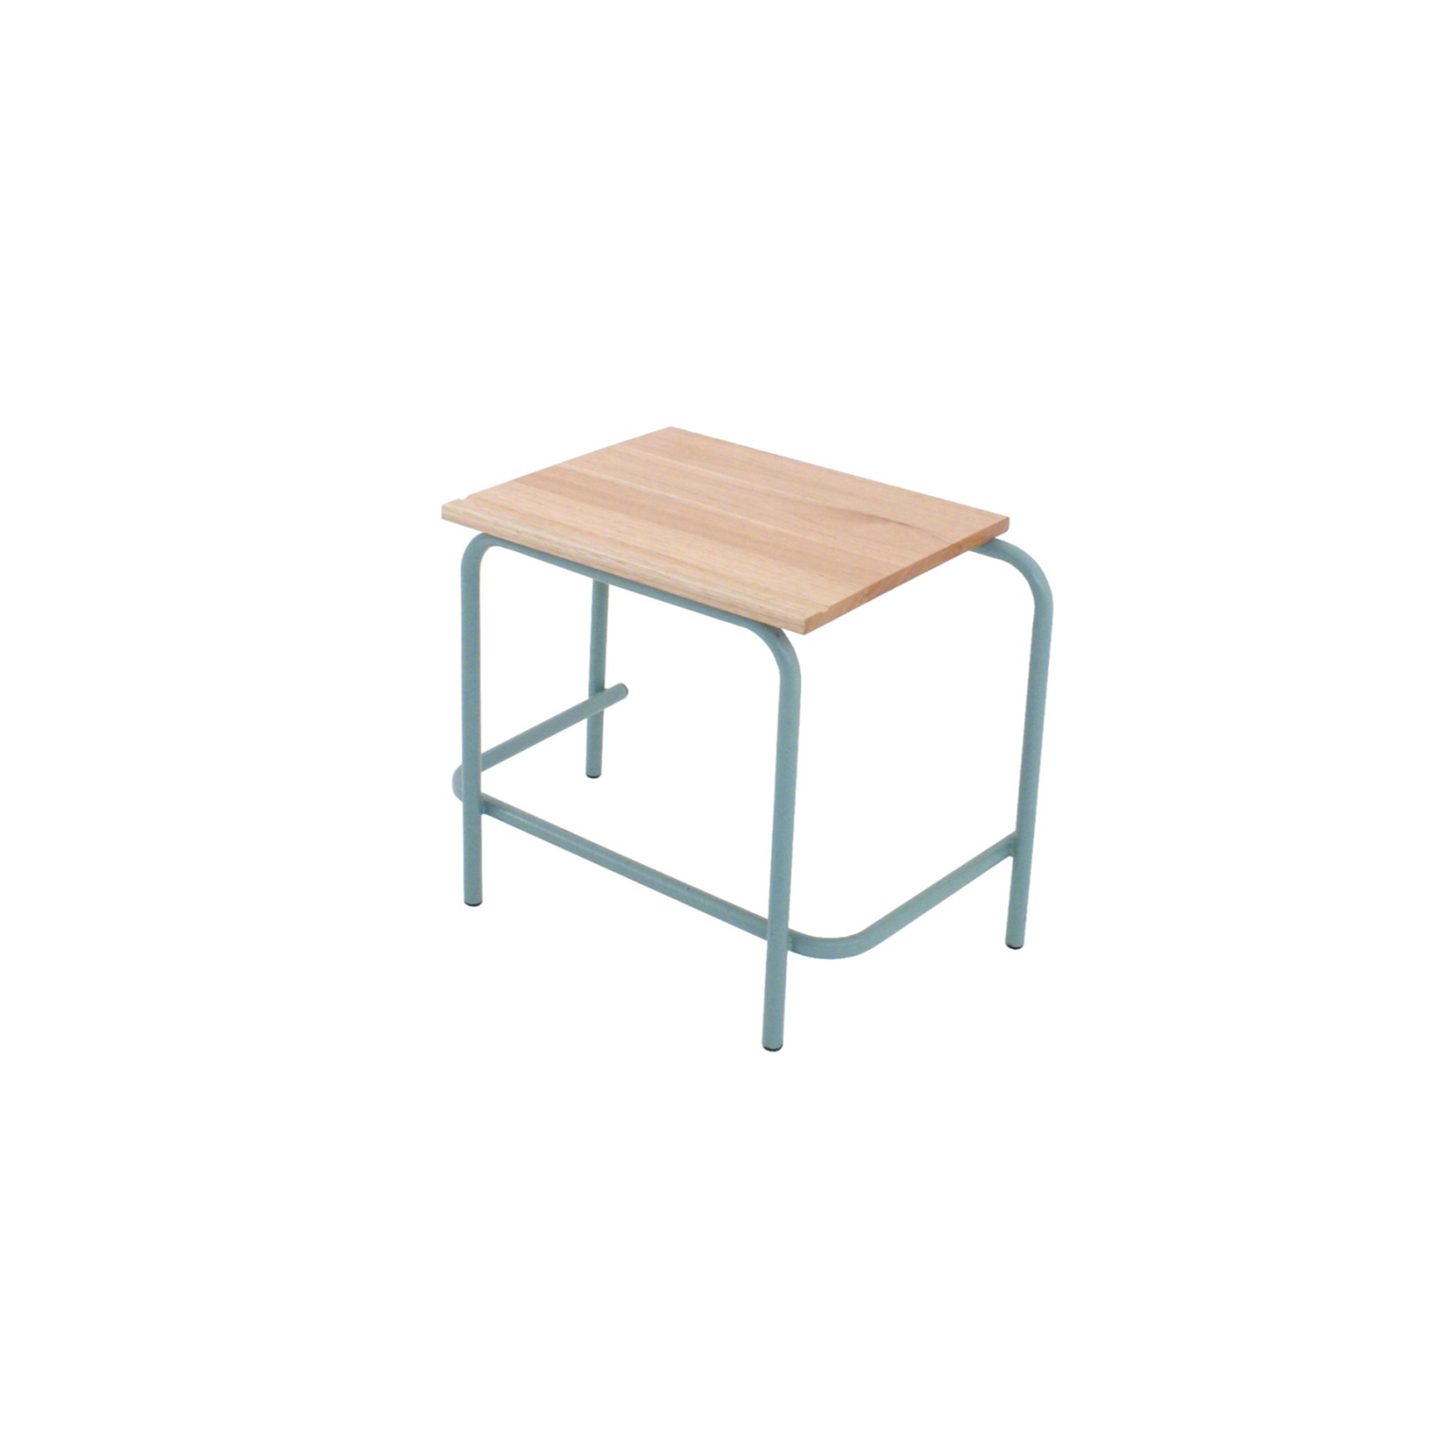 Dimensions - 550 x 450 x 575mm Made from Medium Density Fiberboard (MDF) Serves As A Singe Desk For One Student To Work On. On Steel Legs. Includes Non Slip Feet.